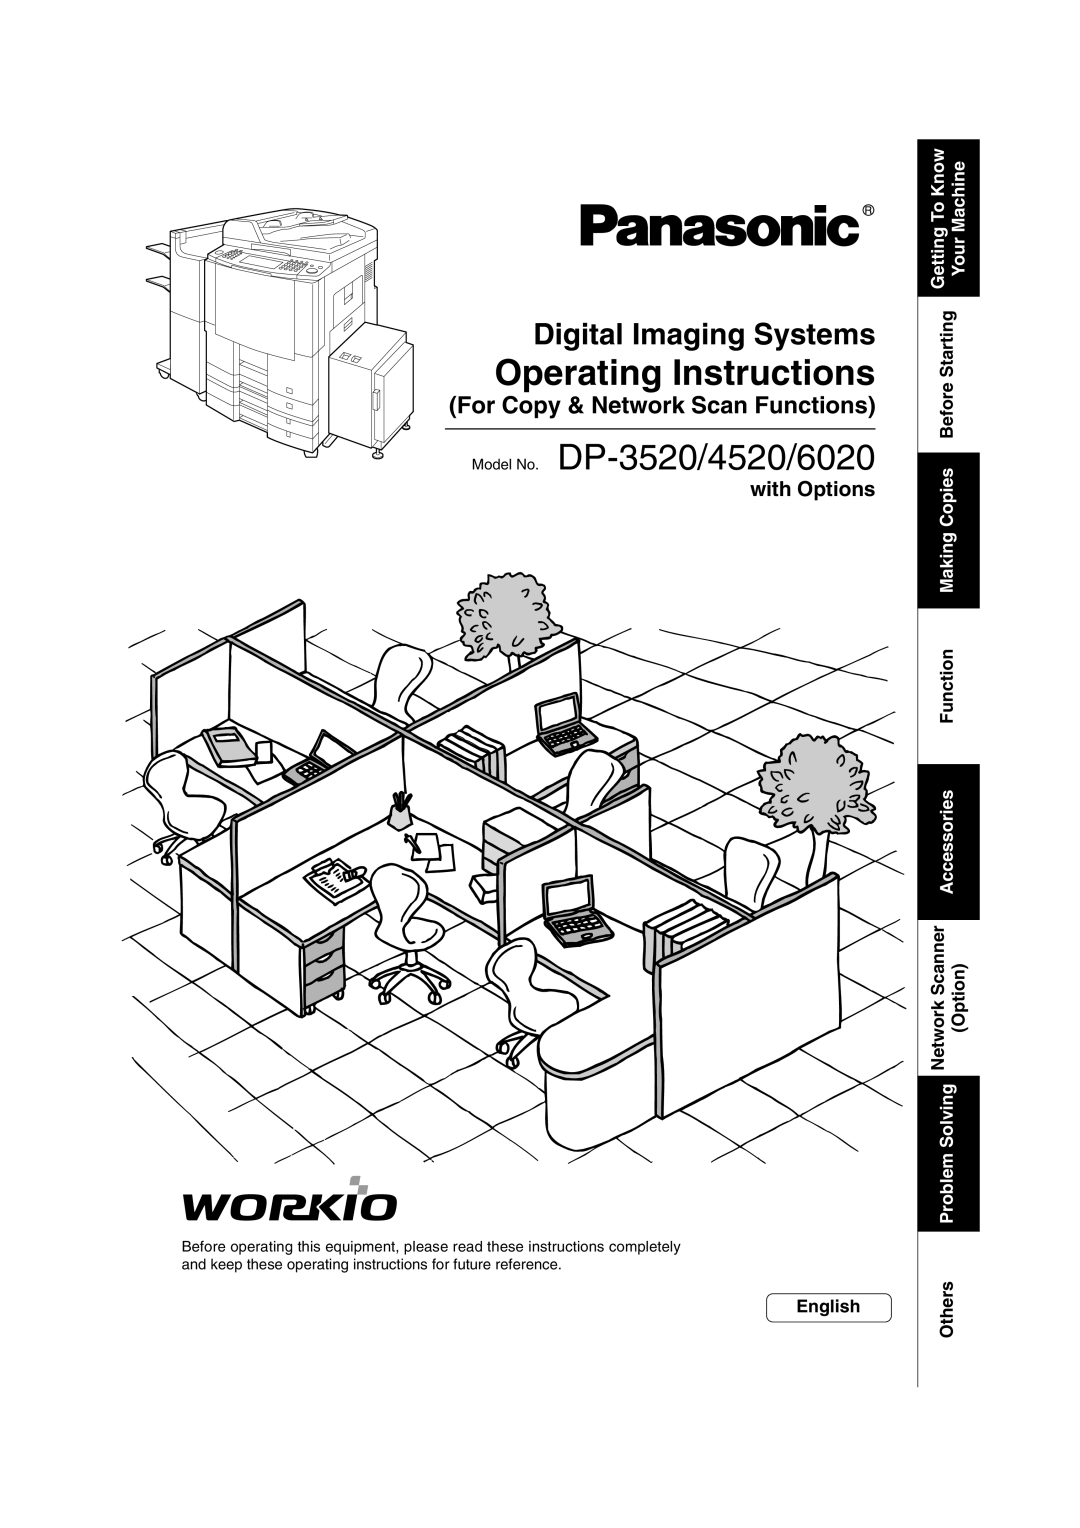 Panasonic 6020 manual Operating Instructions, with Options, Your Machine, Function Making Copies Before Starting, English 